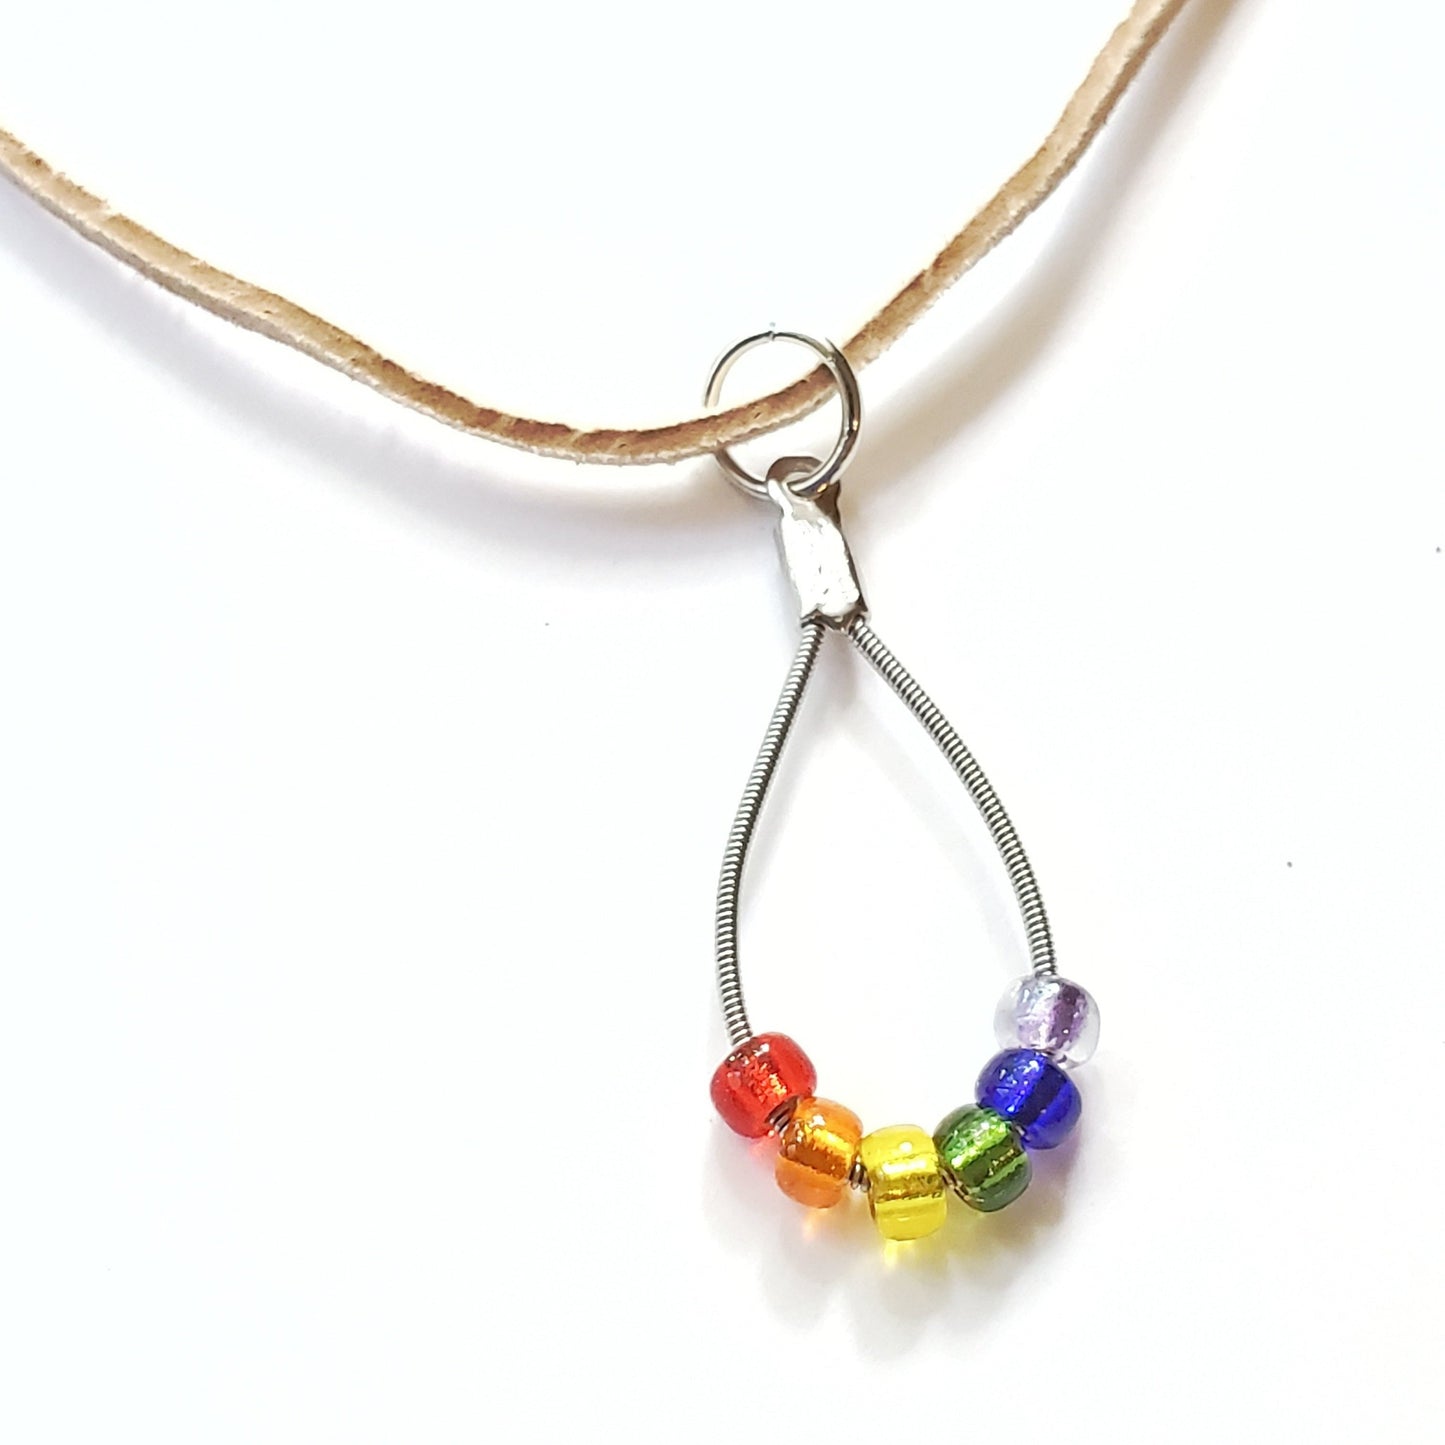 close-up of a necklace made from an upcycled guitar string - 6 glass beads represent the colours of the LGBTQ flag (red, orange, yellow, green, blue and purple) and a beige suede cord - white background